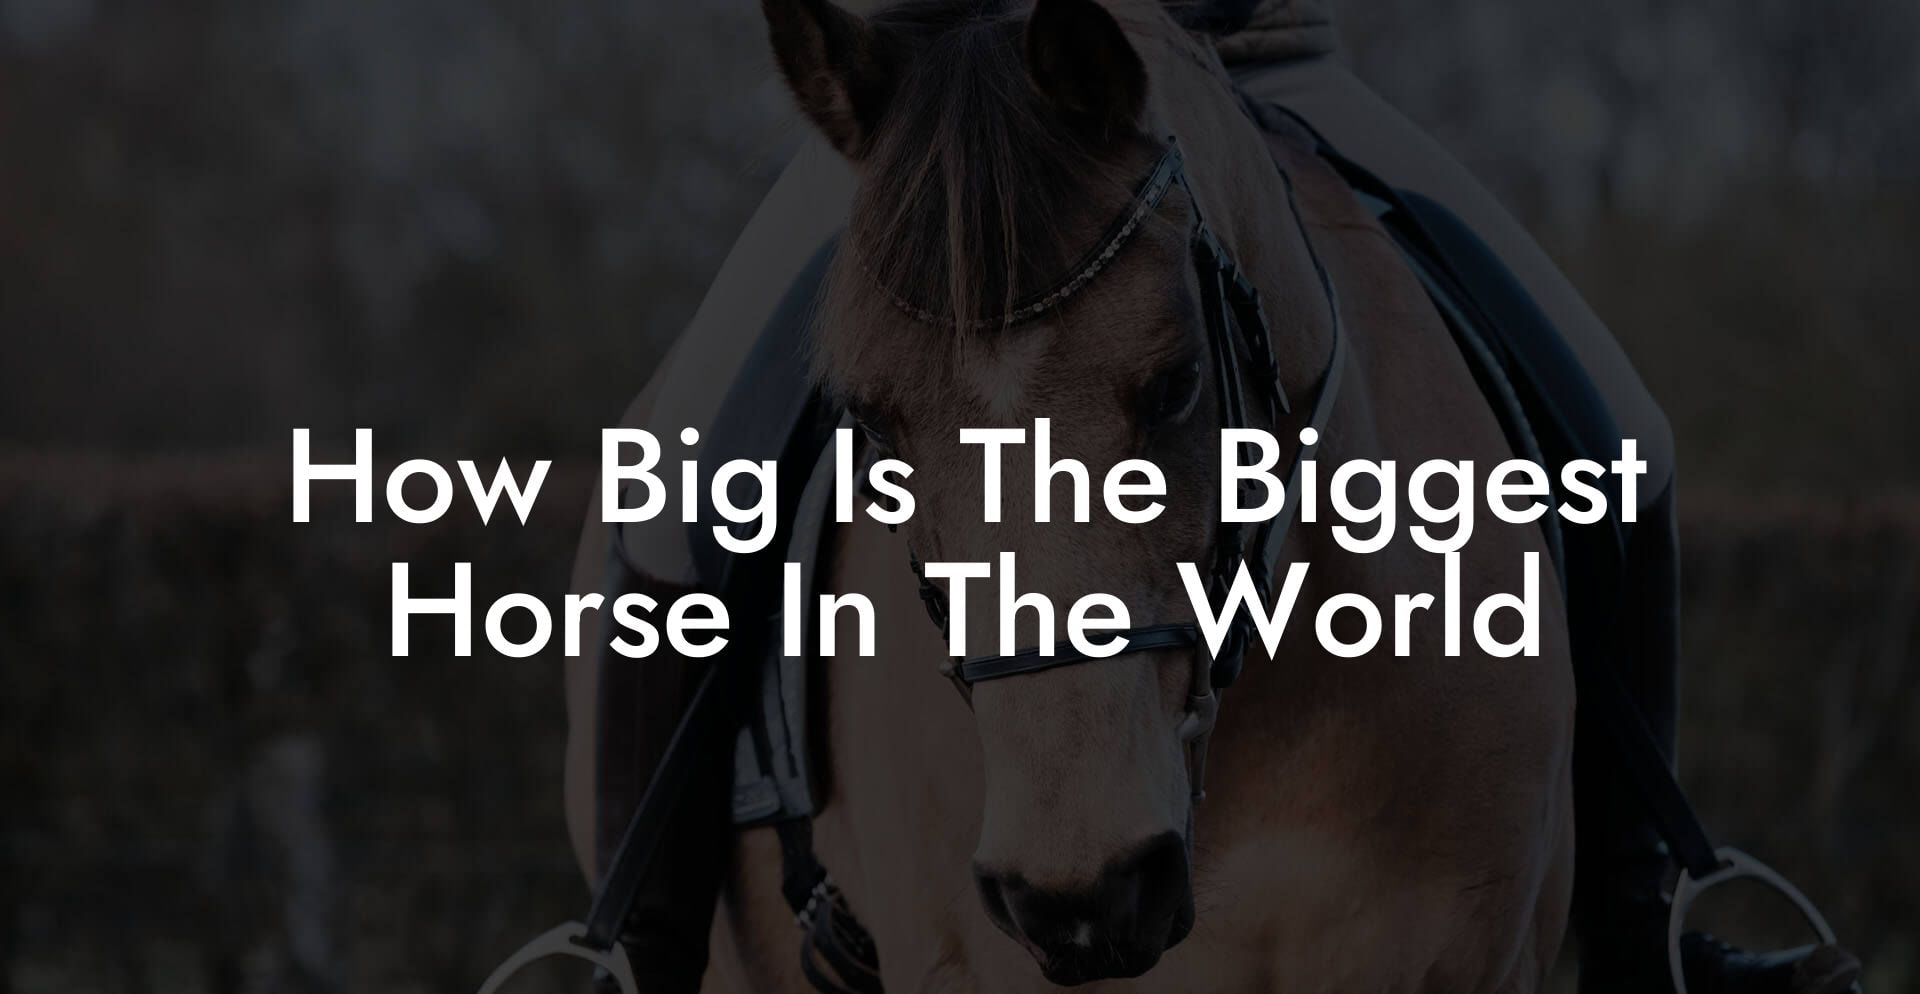 How Big Is The Biggest Horse In The World